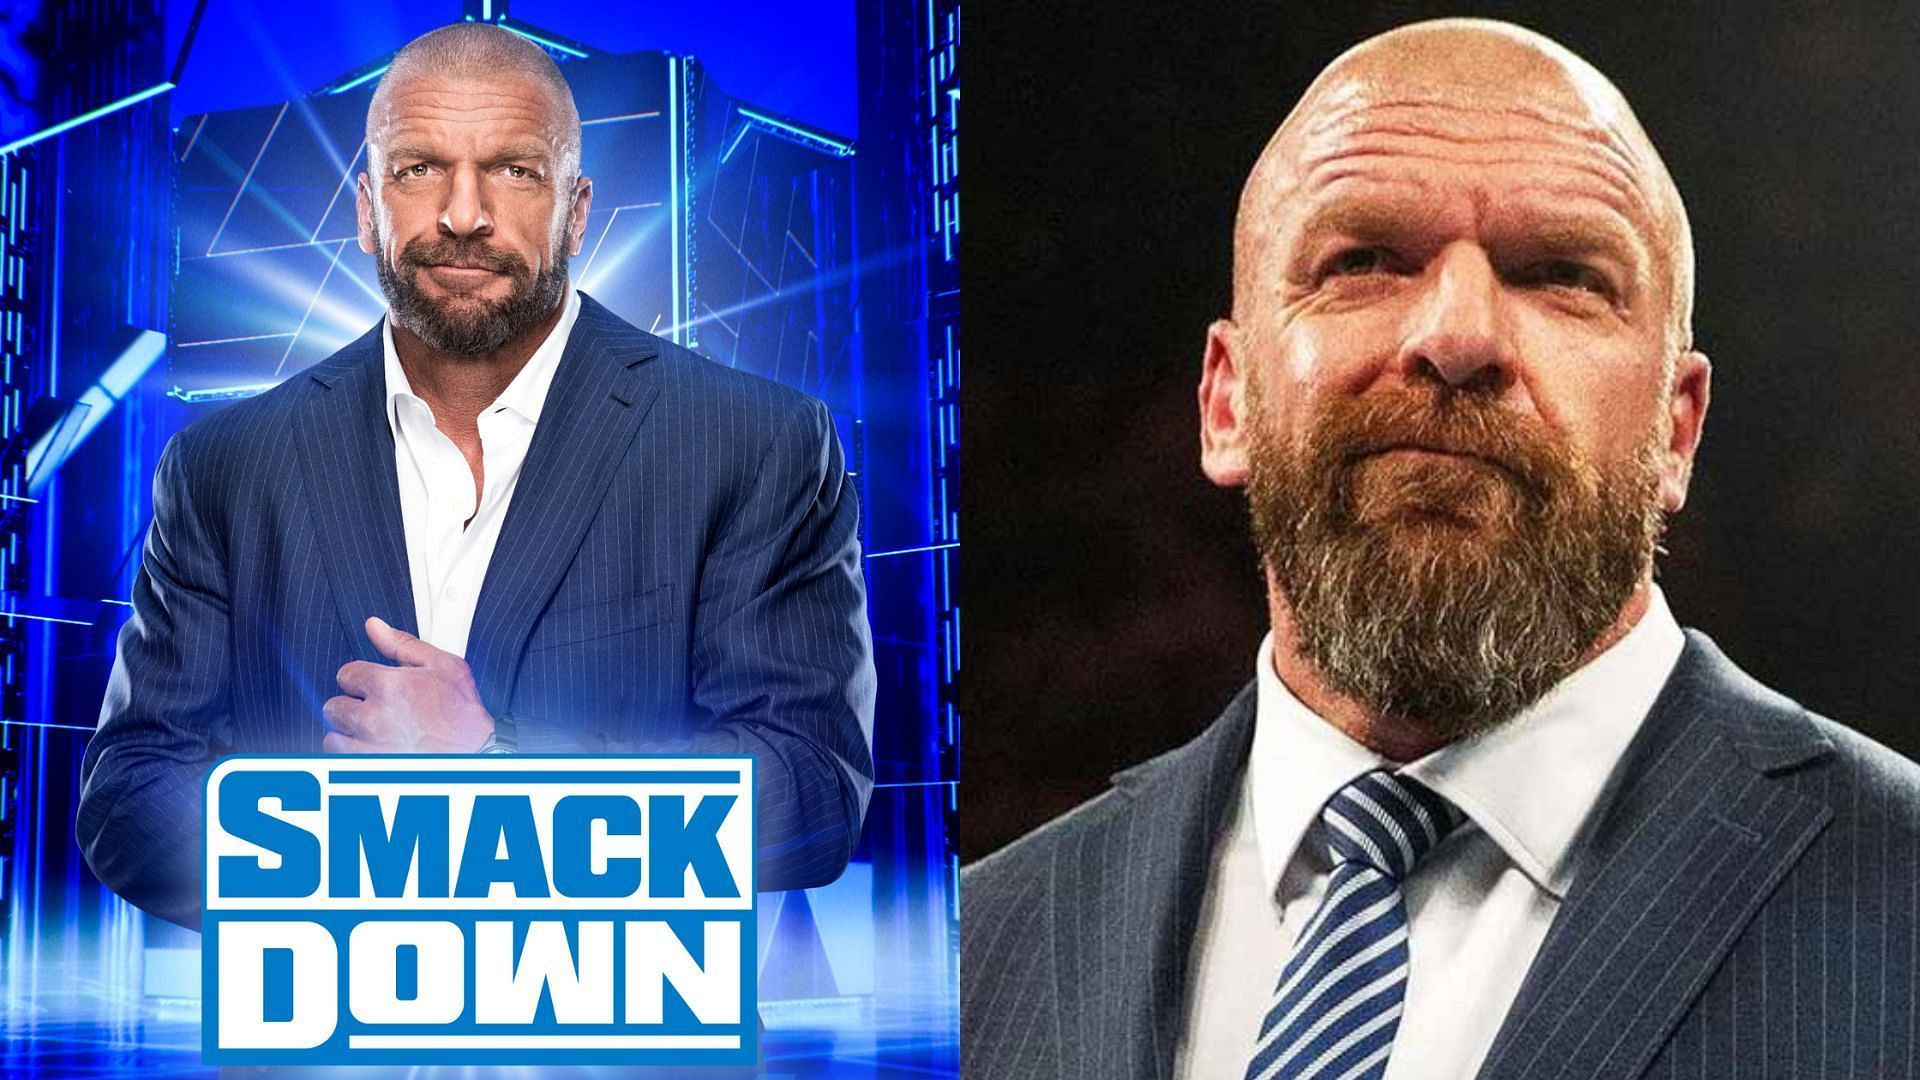 SmackDown will air live from Oklahoma tonight.